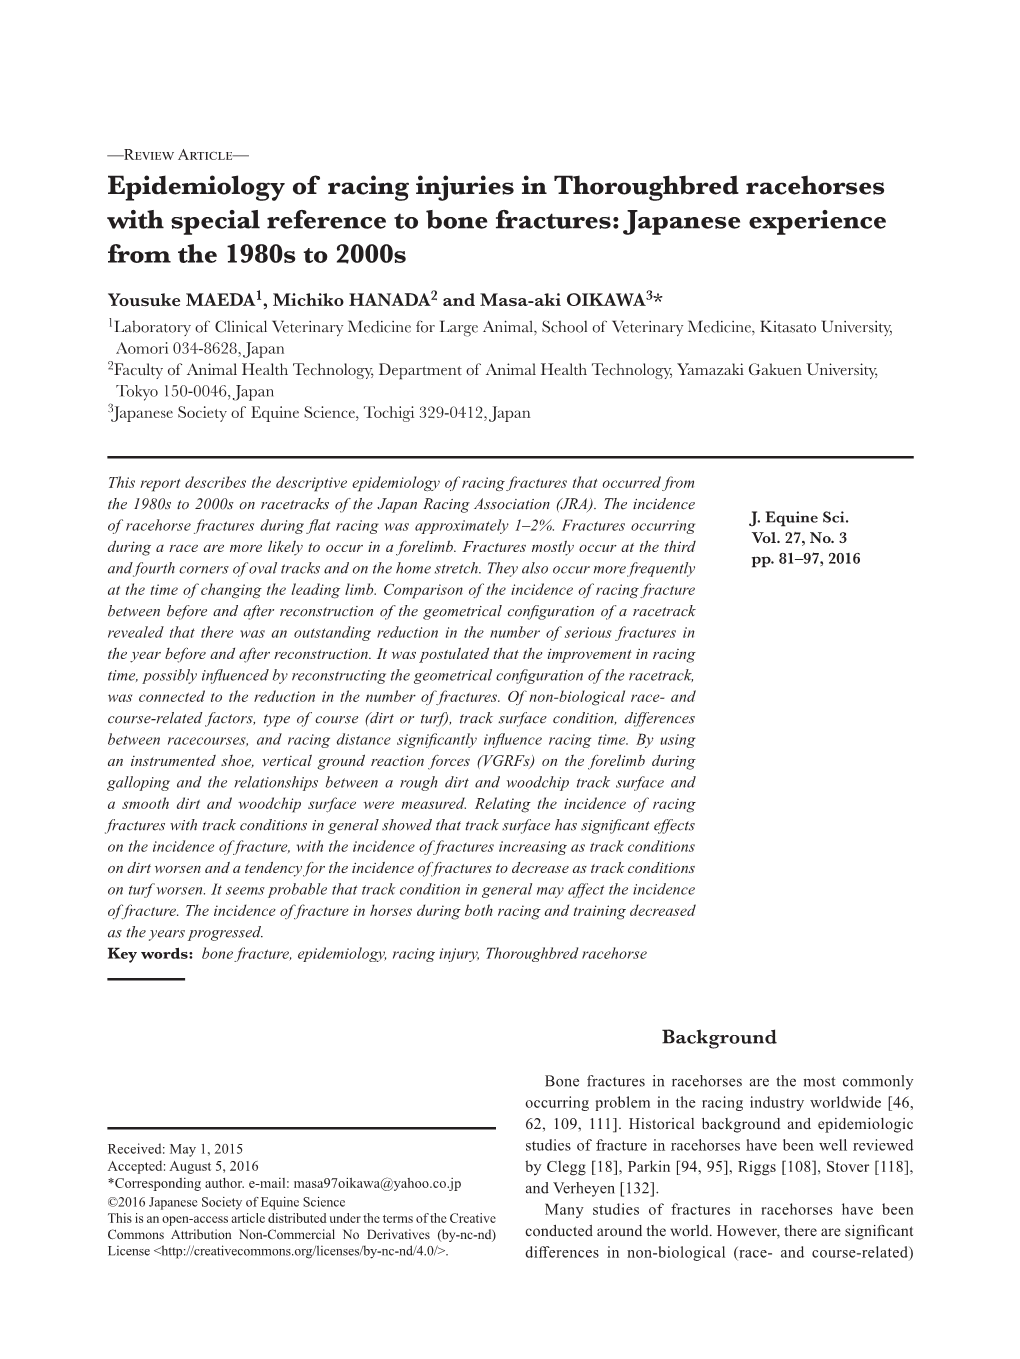 Epidemiology of Racing Injuries in Thoroughbred Racehorses with Special Reference to Bone Fractures: Japanese Experience from the 1980S to 2000S